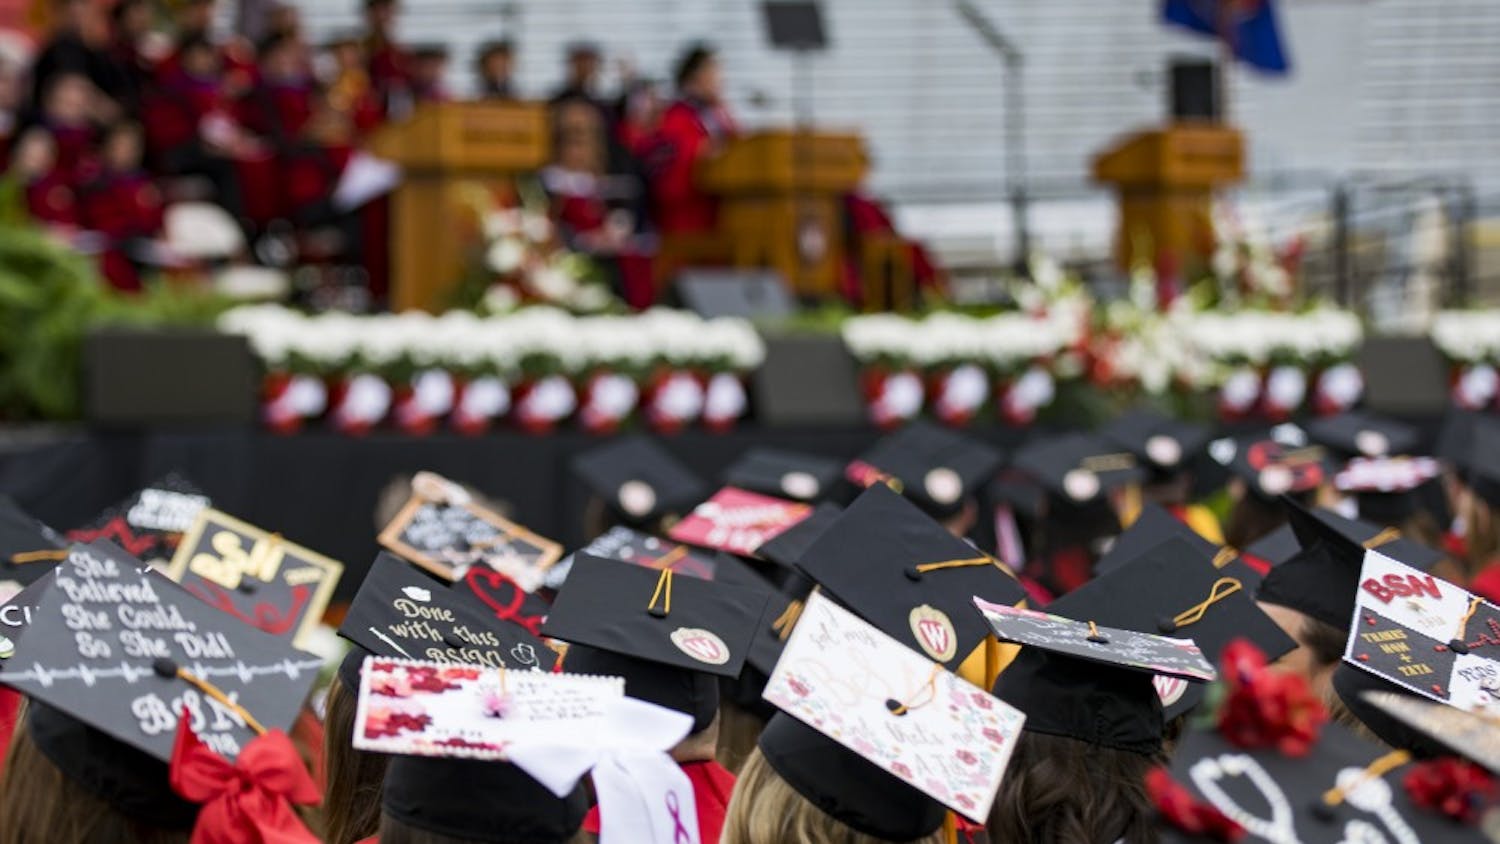 Over 7,000 students from the class of 2018 received bachelor's, master's and law degrees from UW-Madison.